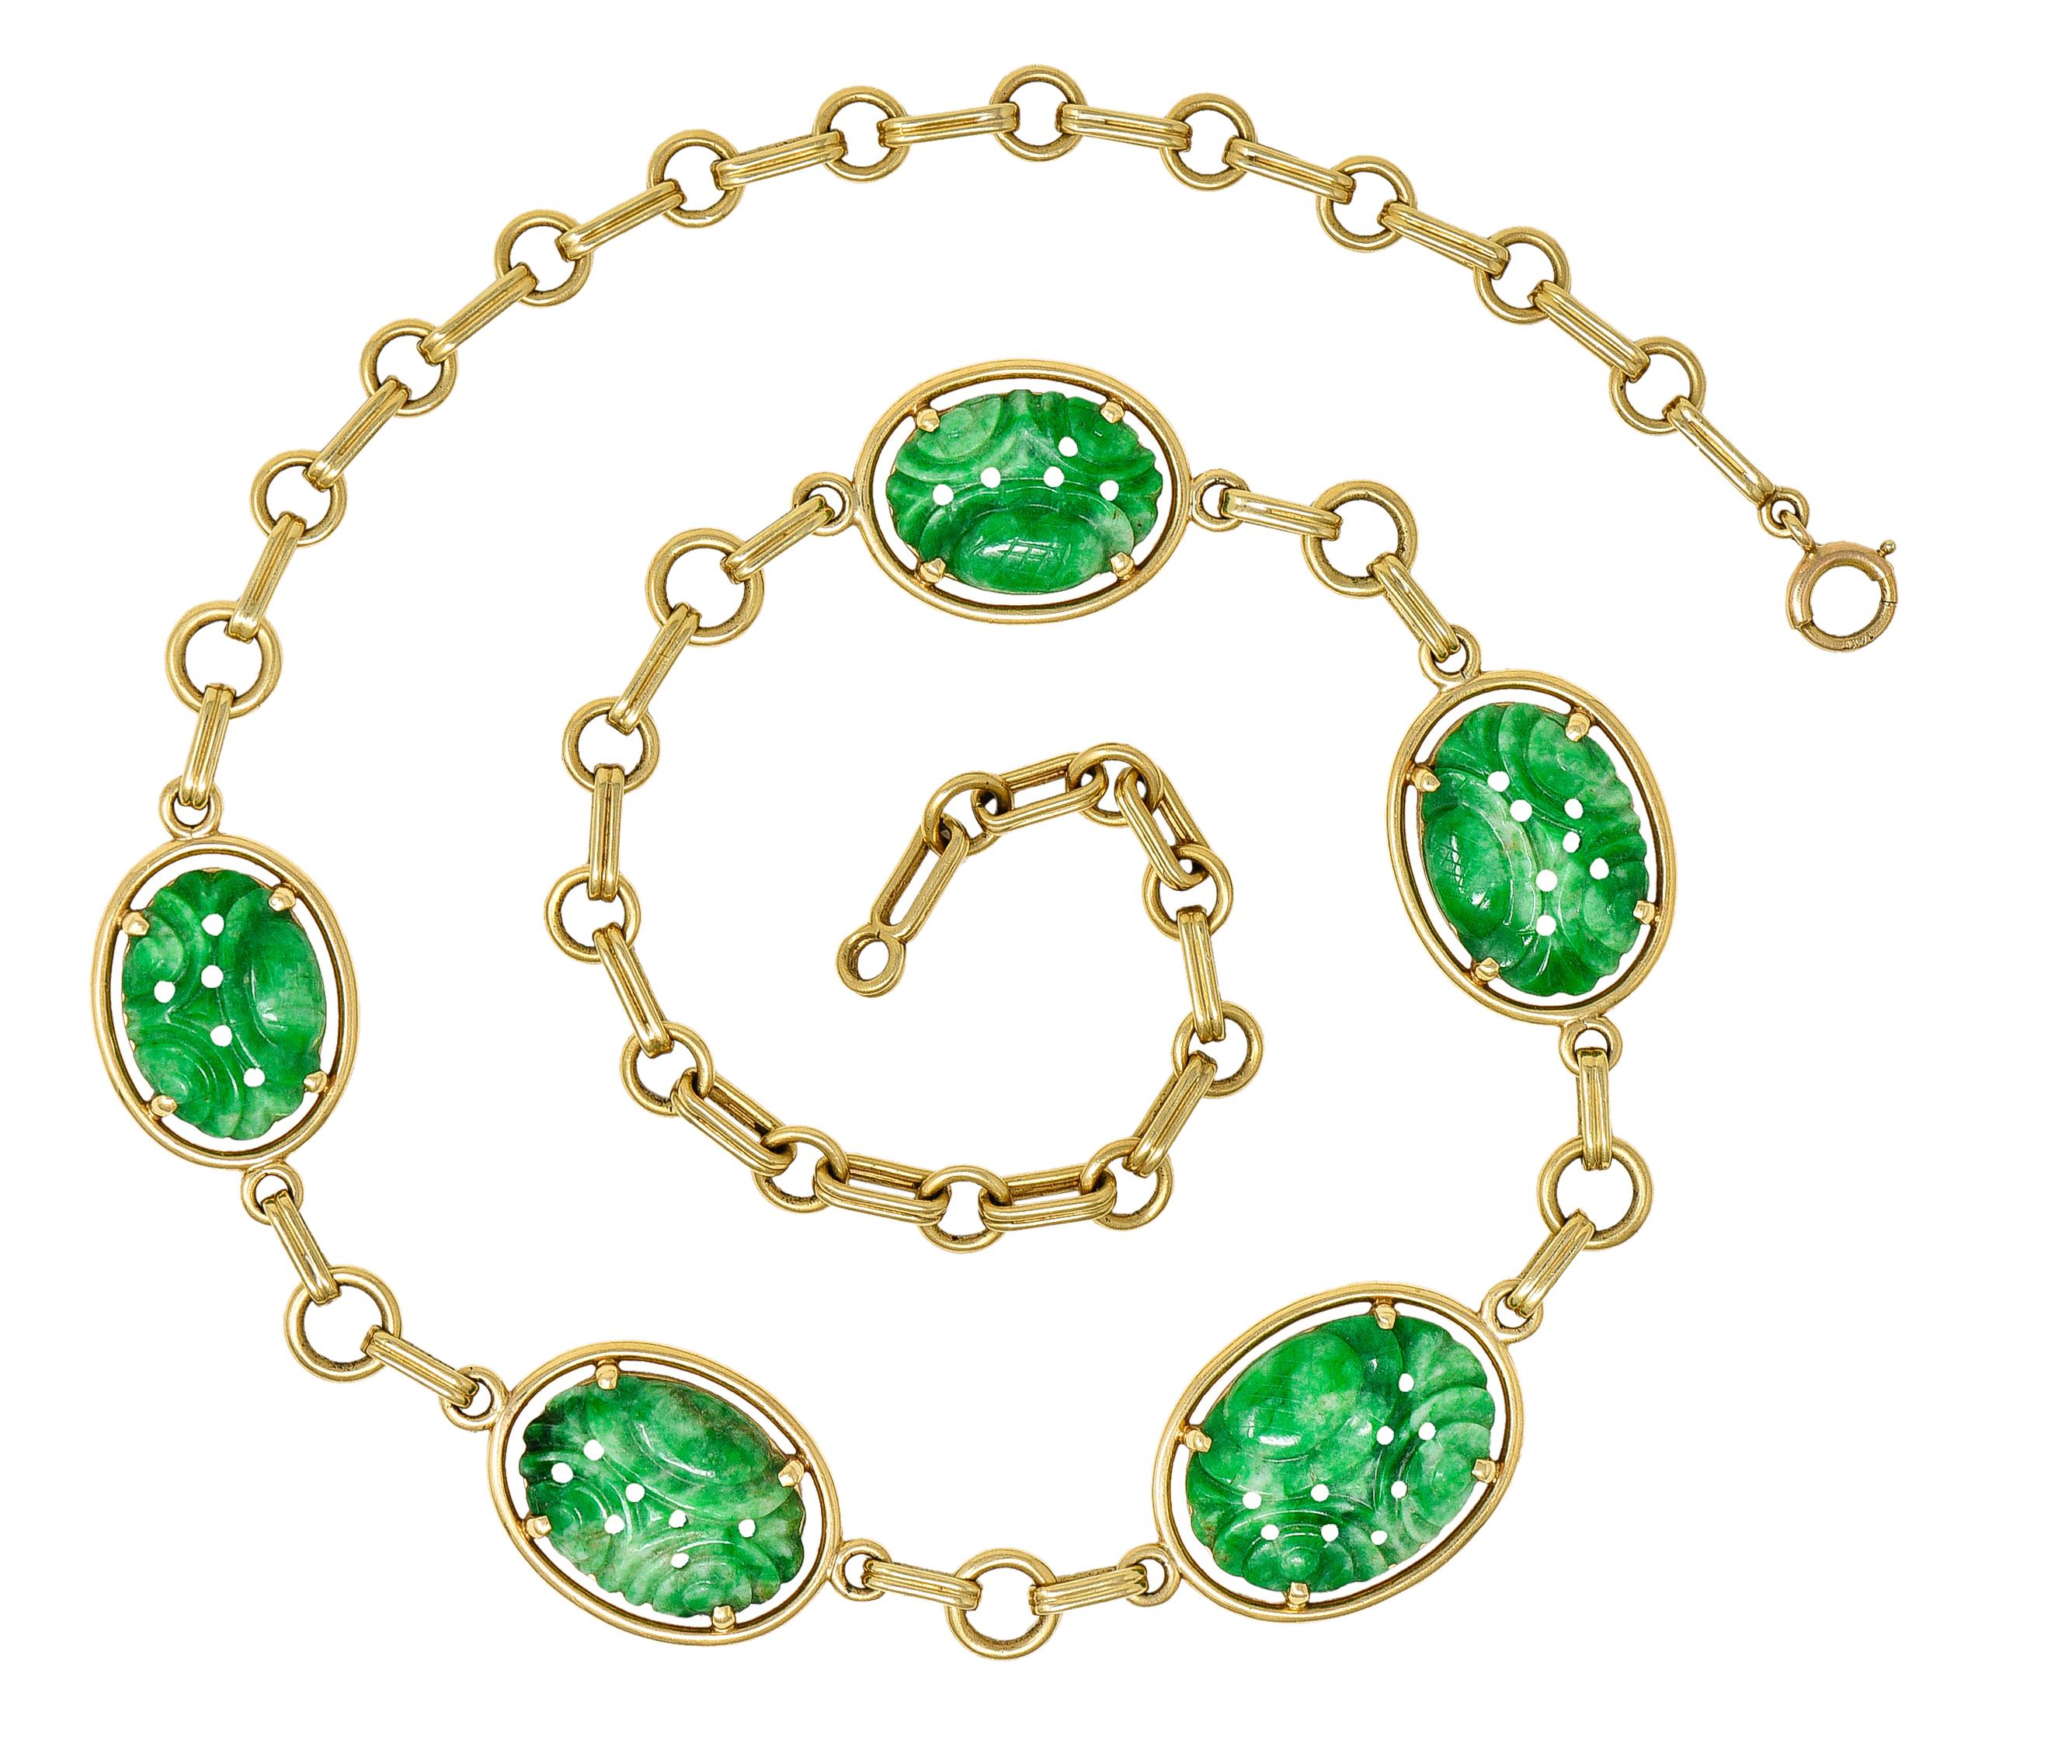 Necklace is comprised of circular links alternating with ribbed spacer bar links. While centering five carved jade oval stations - jade measures from 20.0 x 15.0 mm to 16.0 x 12.0 mm. Well matched, opaque, and strongly mottled green to pastel green